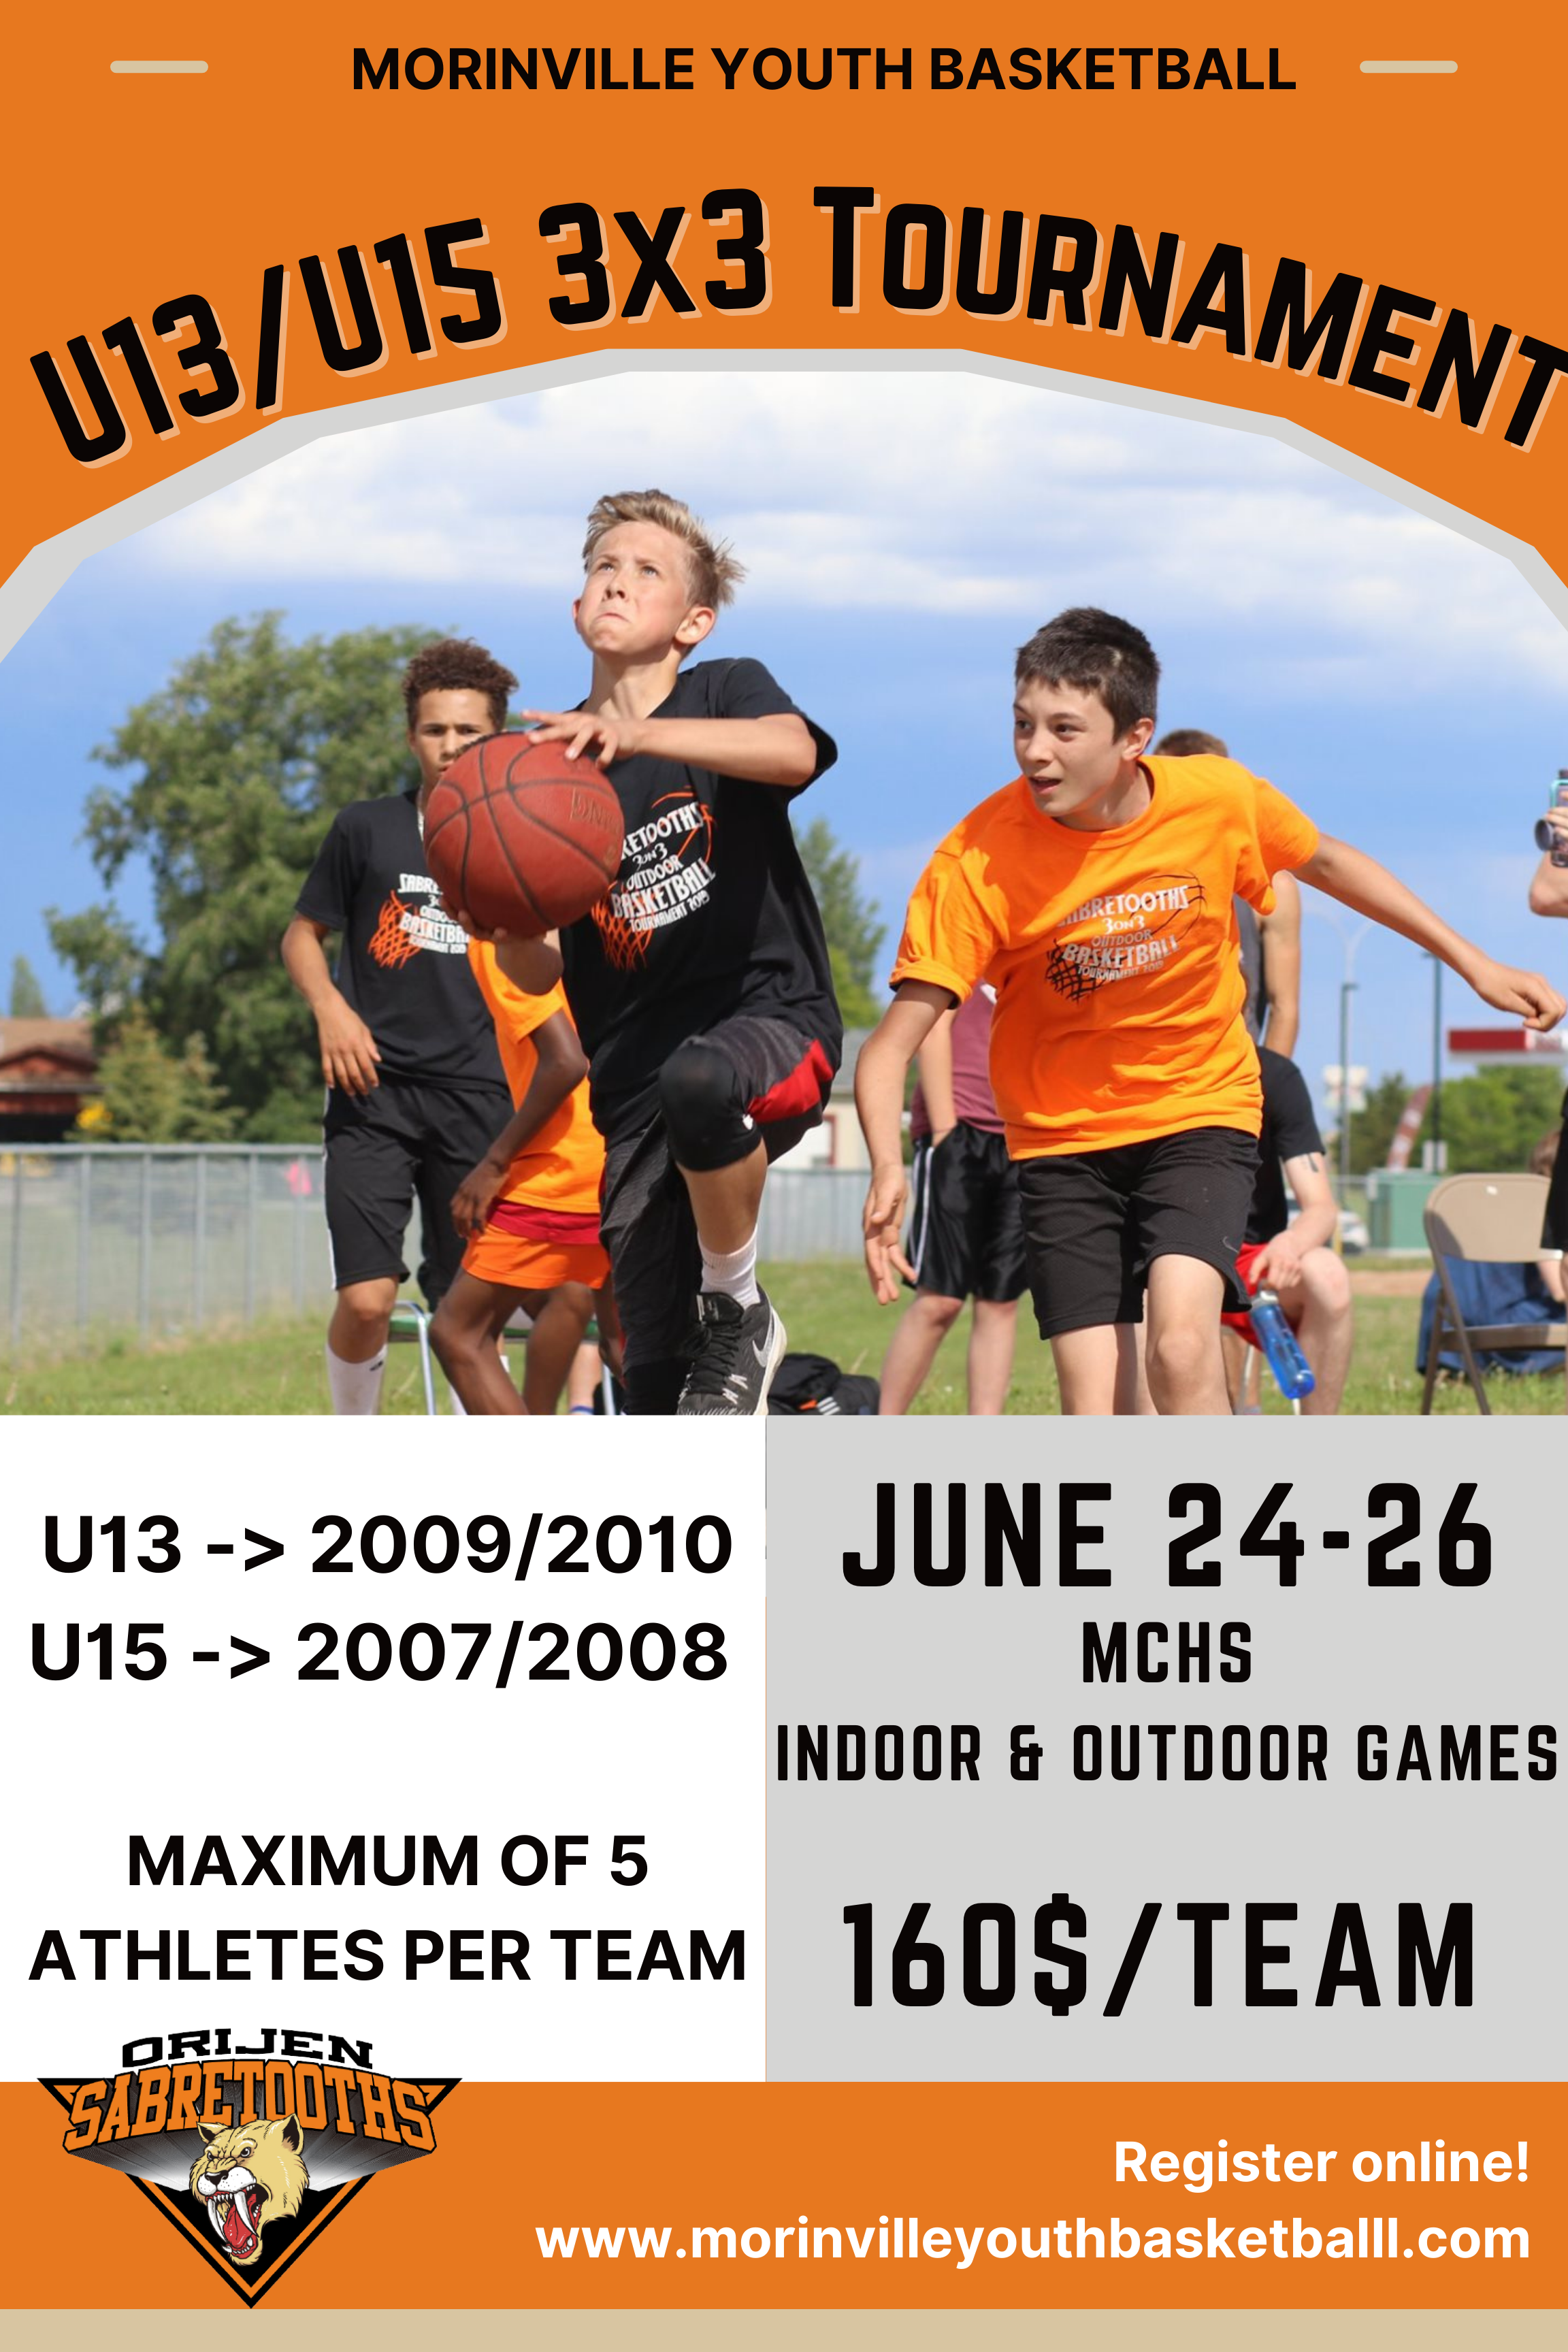 Morinville Youth Basketball 3x3 Tournament  June 24 - 26